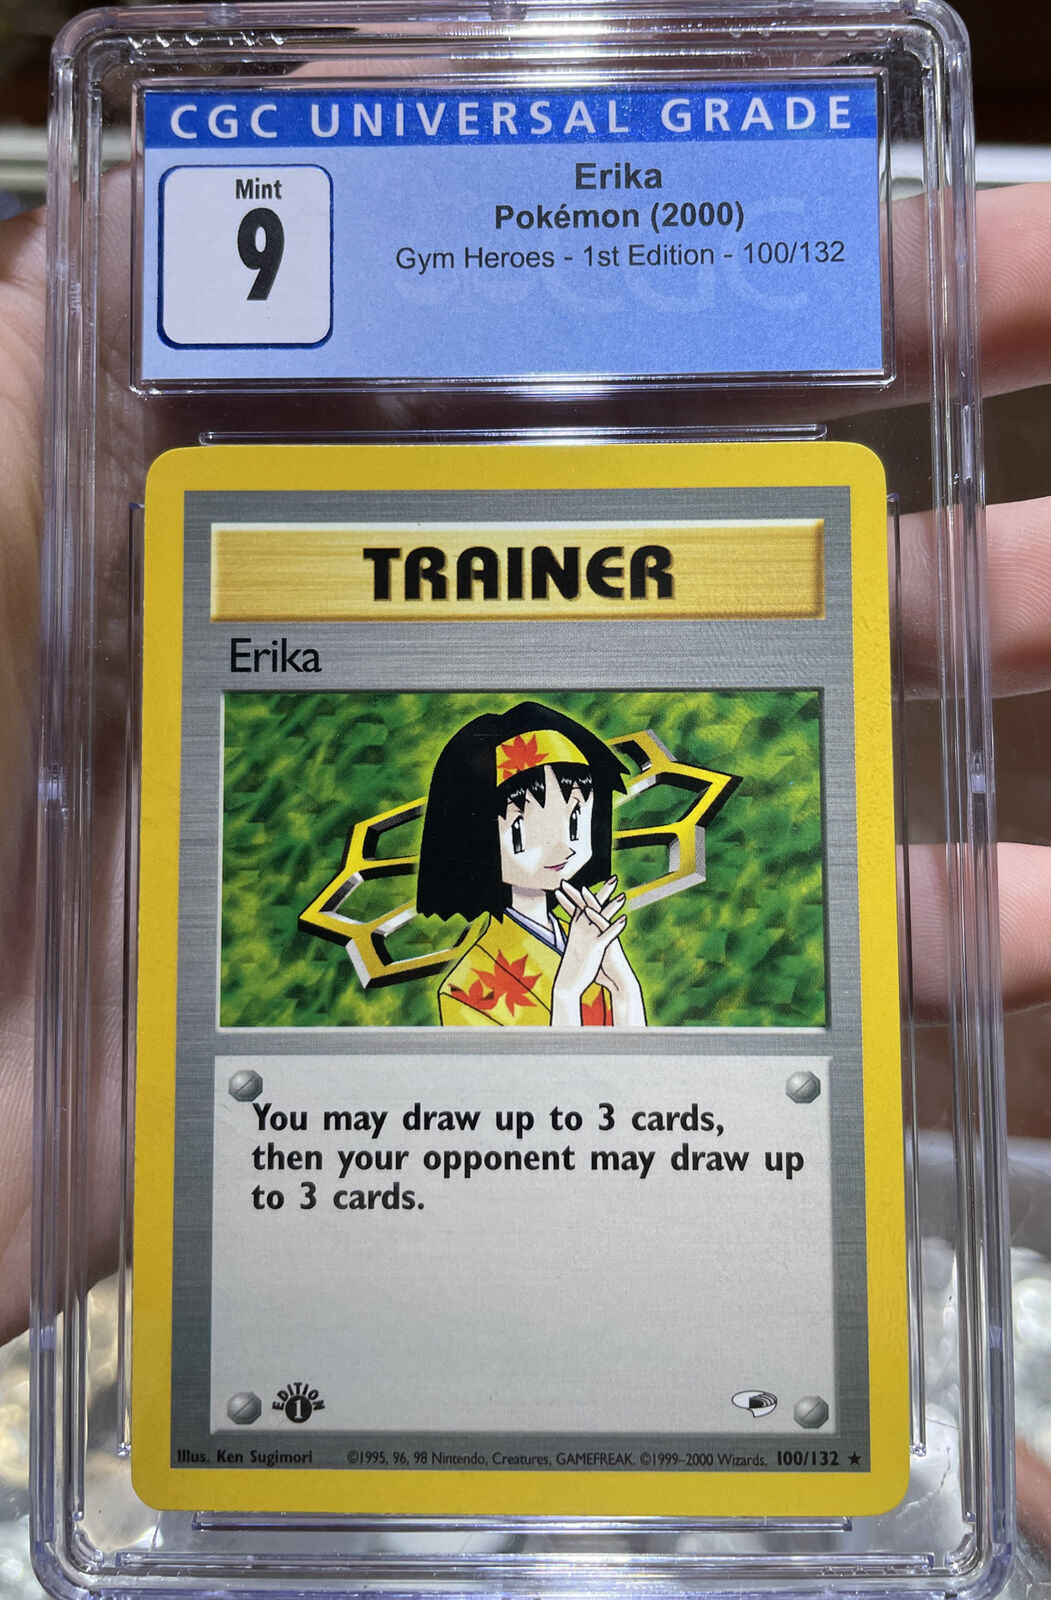 Erika 1st Edition Gym Heroes Mint 9 CGC Pokemon #100 for Sale ...